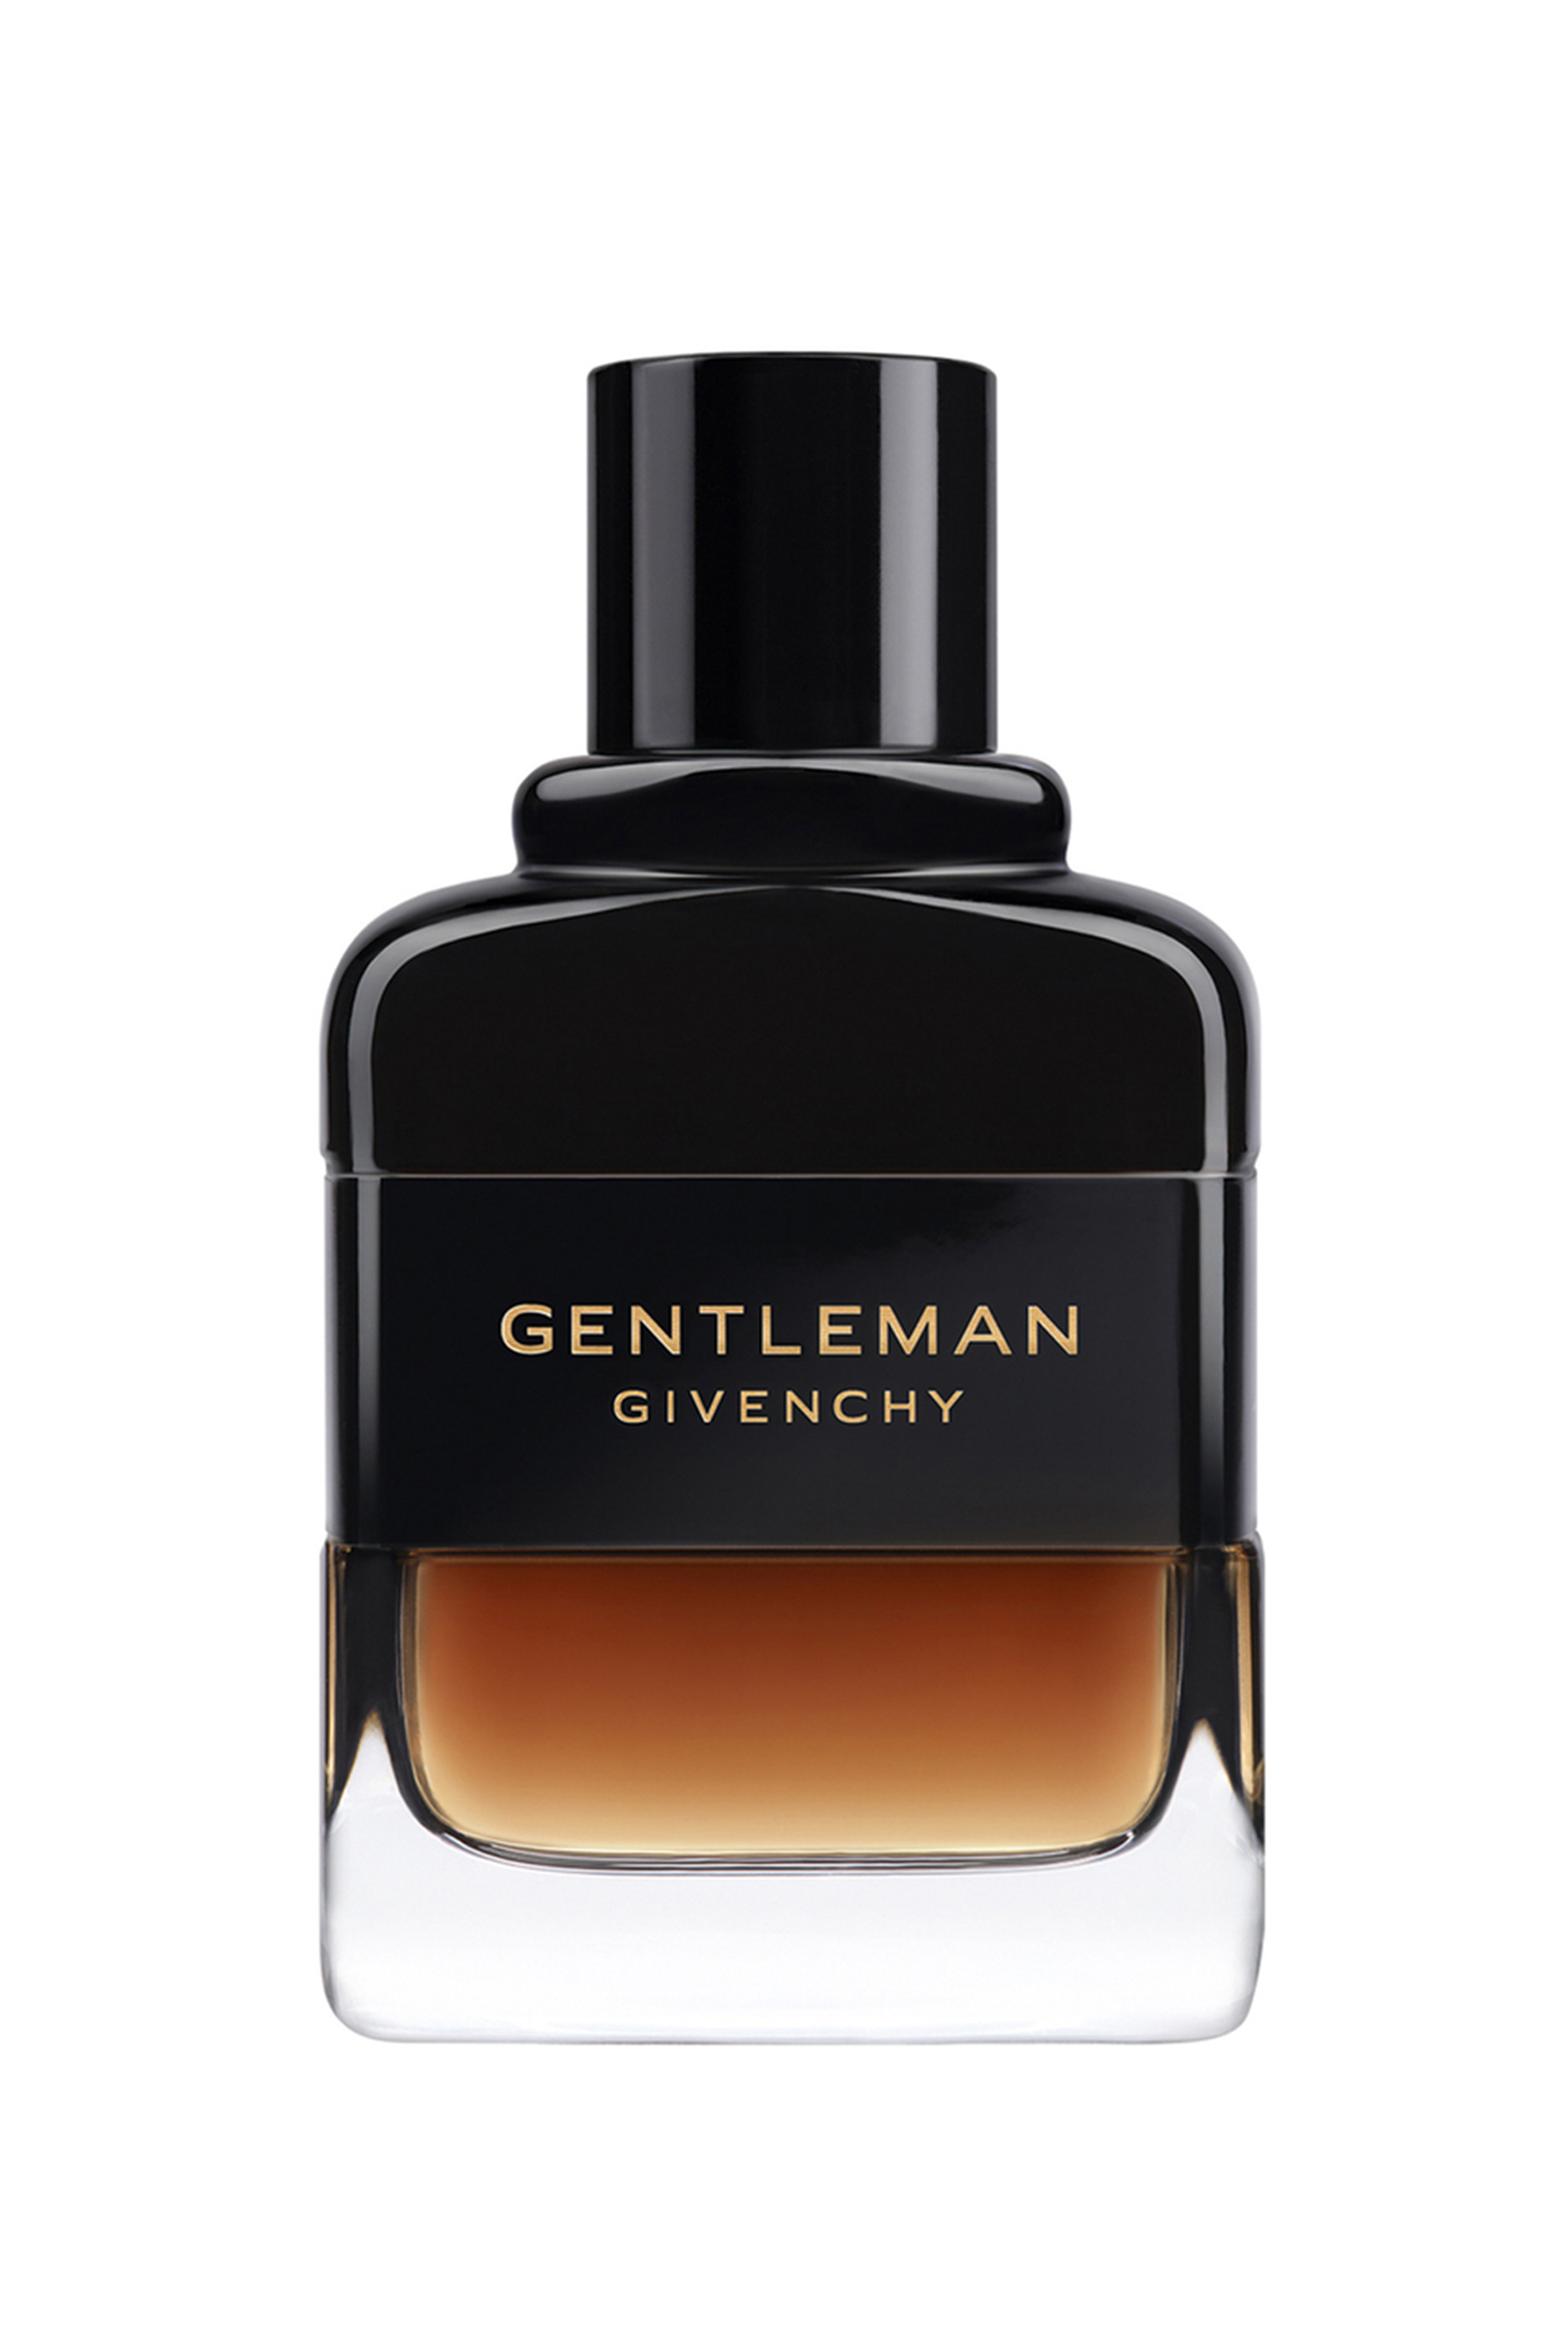 Givenchy Gentleman For Men Edp Beauty Tribe Free 2hr, 46% OFF